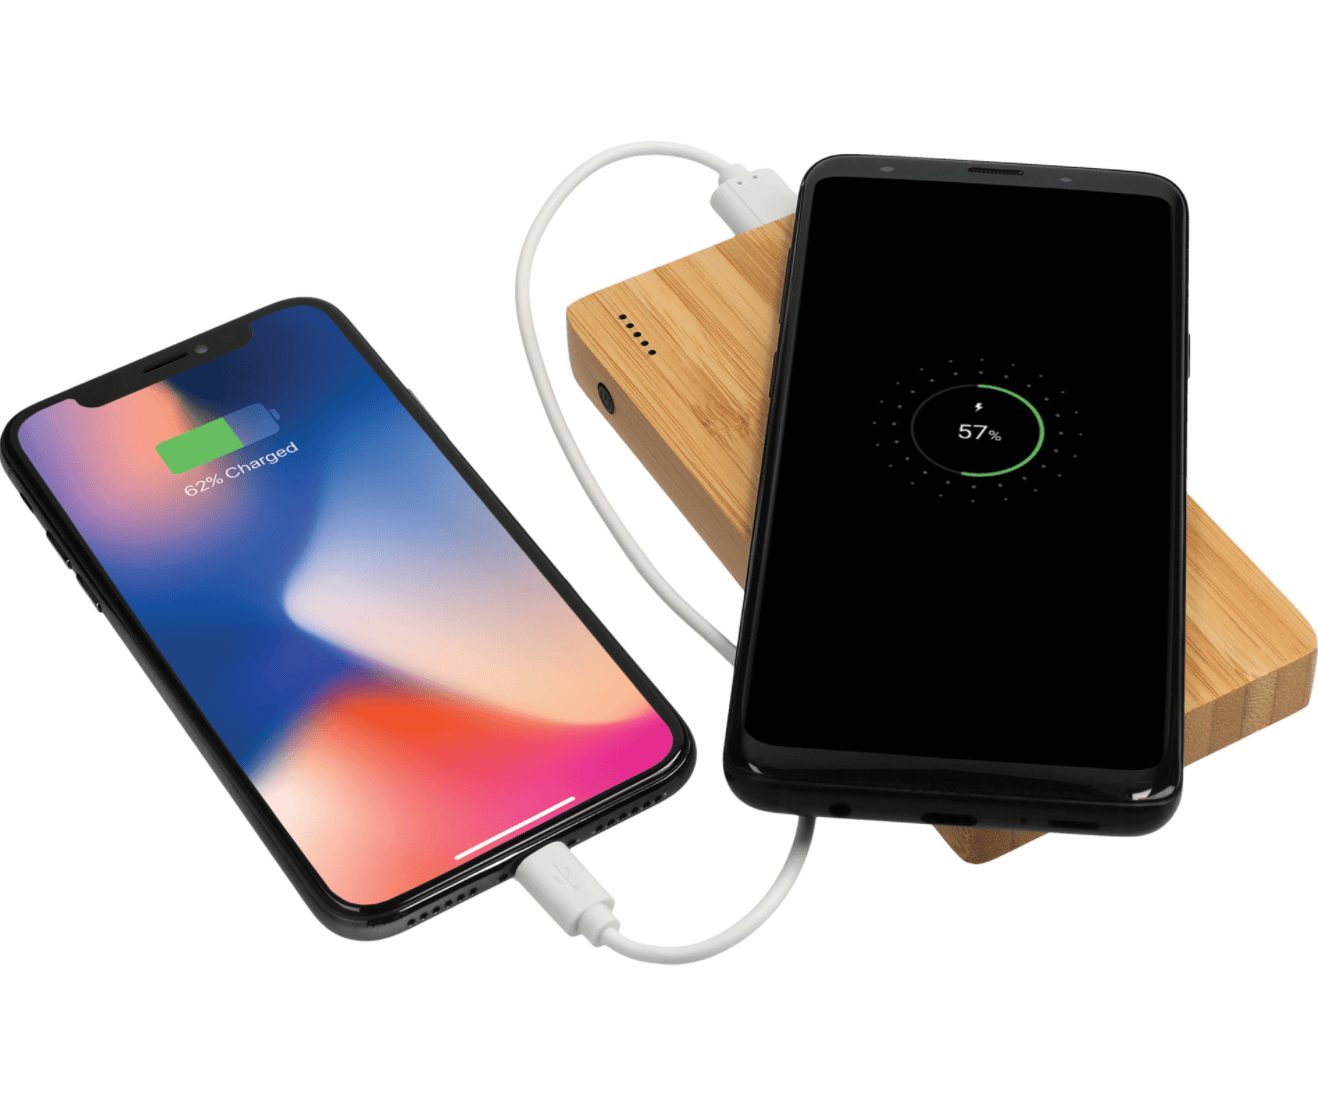 PCNA Wireless Charger 1